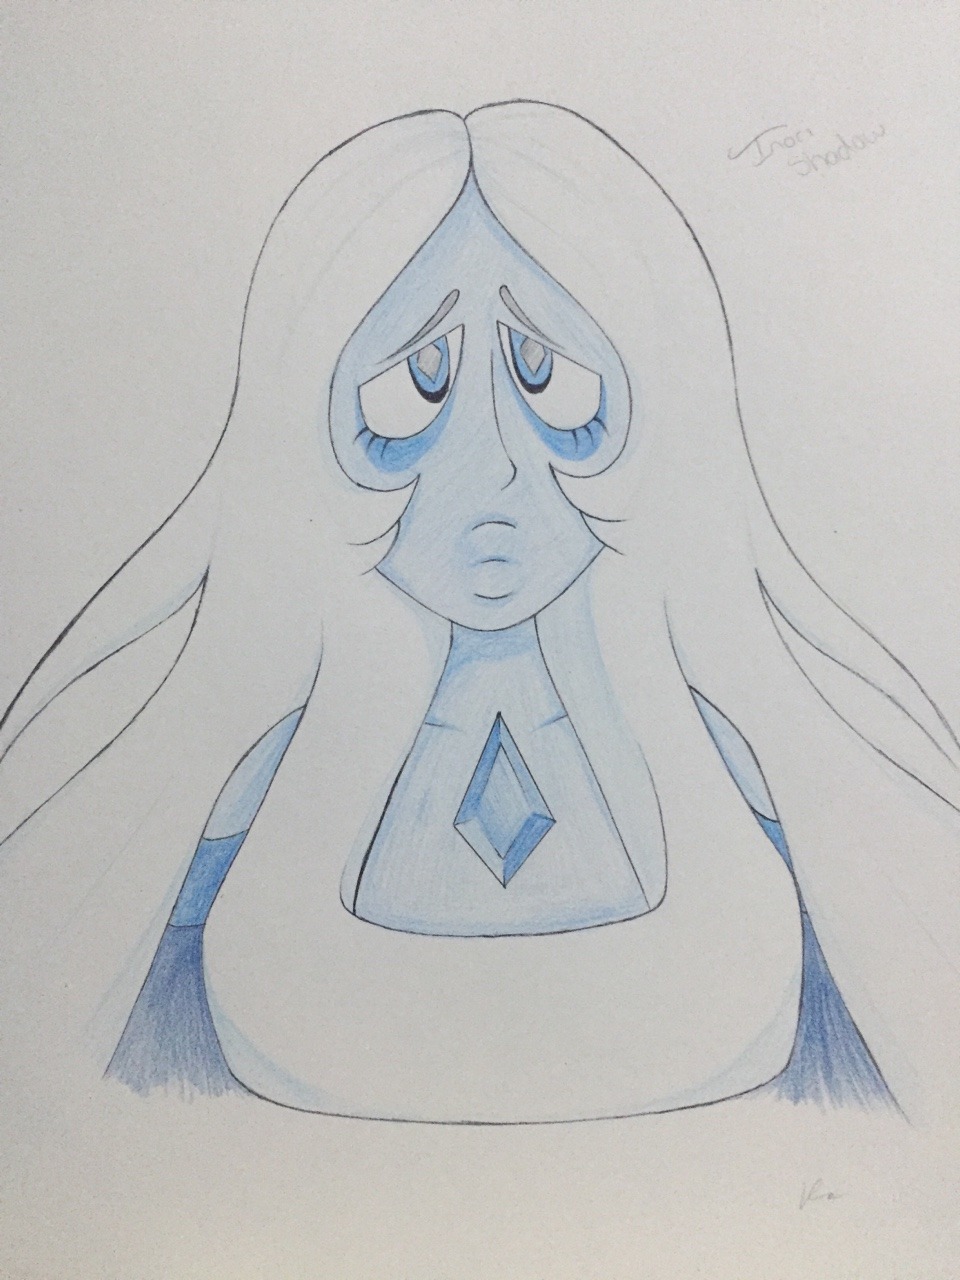 Brother got me a big ol sketchy book for Christmas and thought I’d draw my favourite diamond to start it off :)